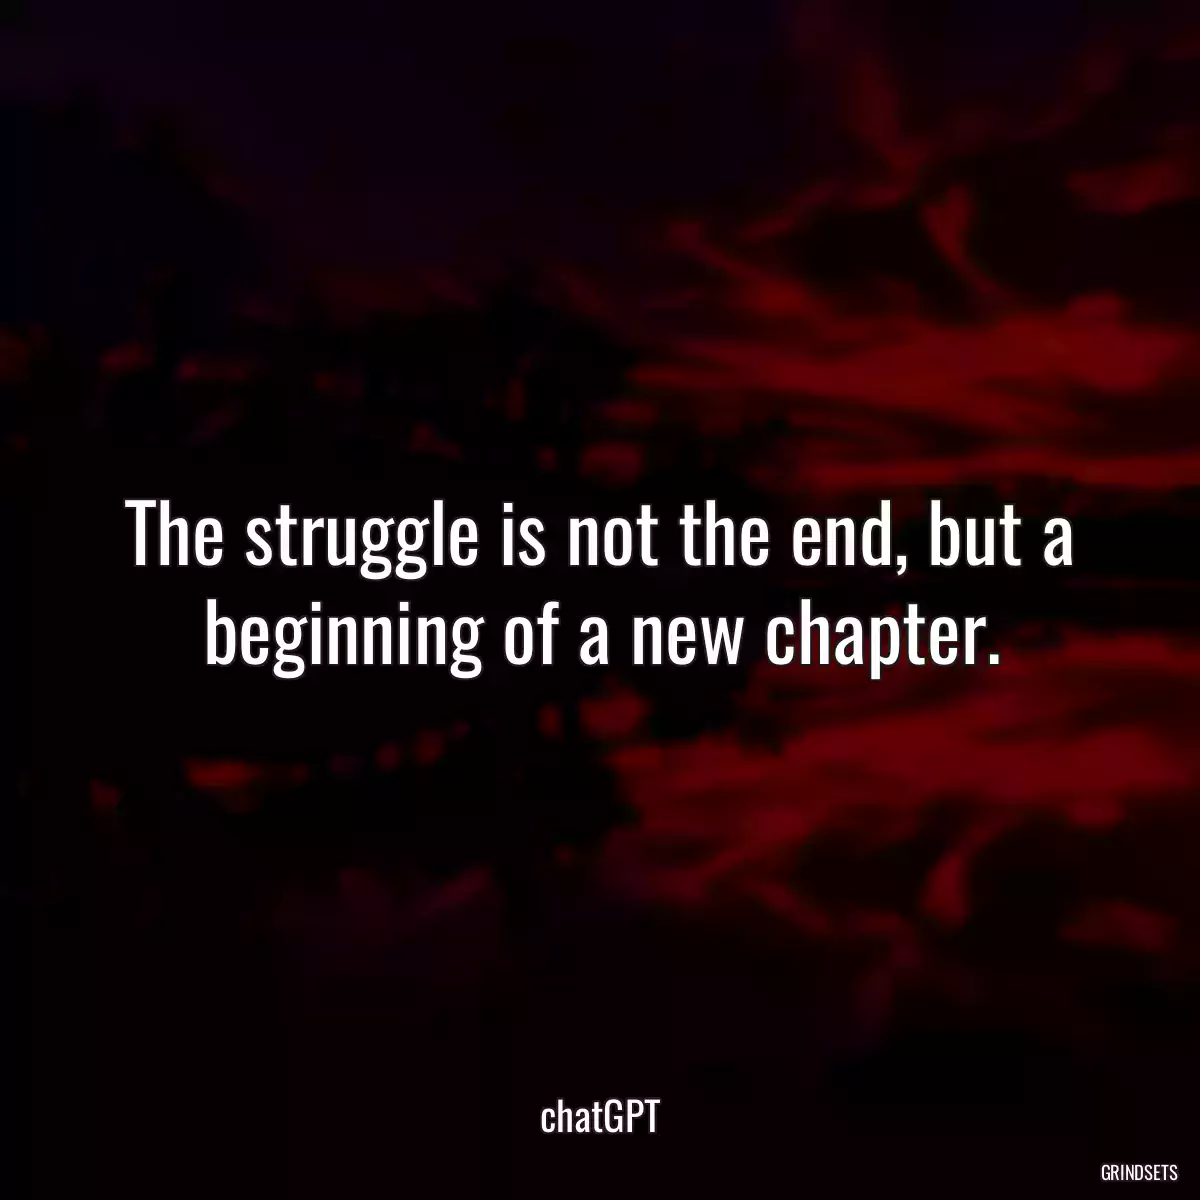 The struggle is not the end, but a beginning of a new chapter.